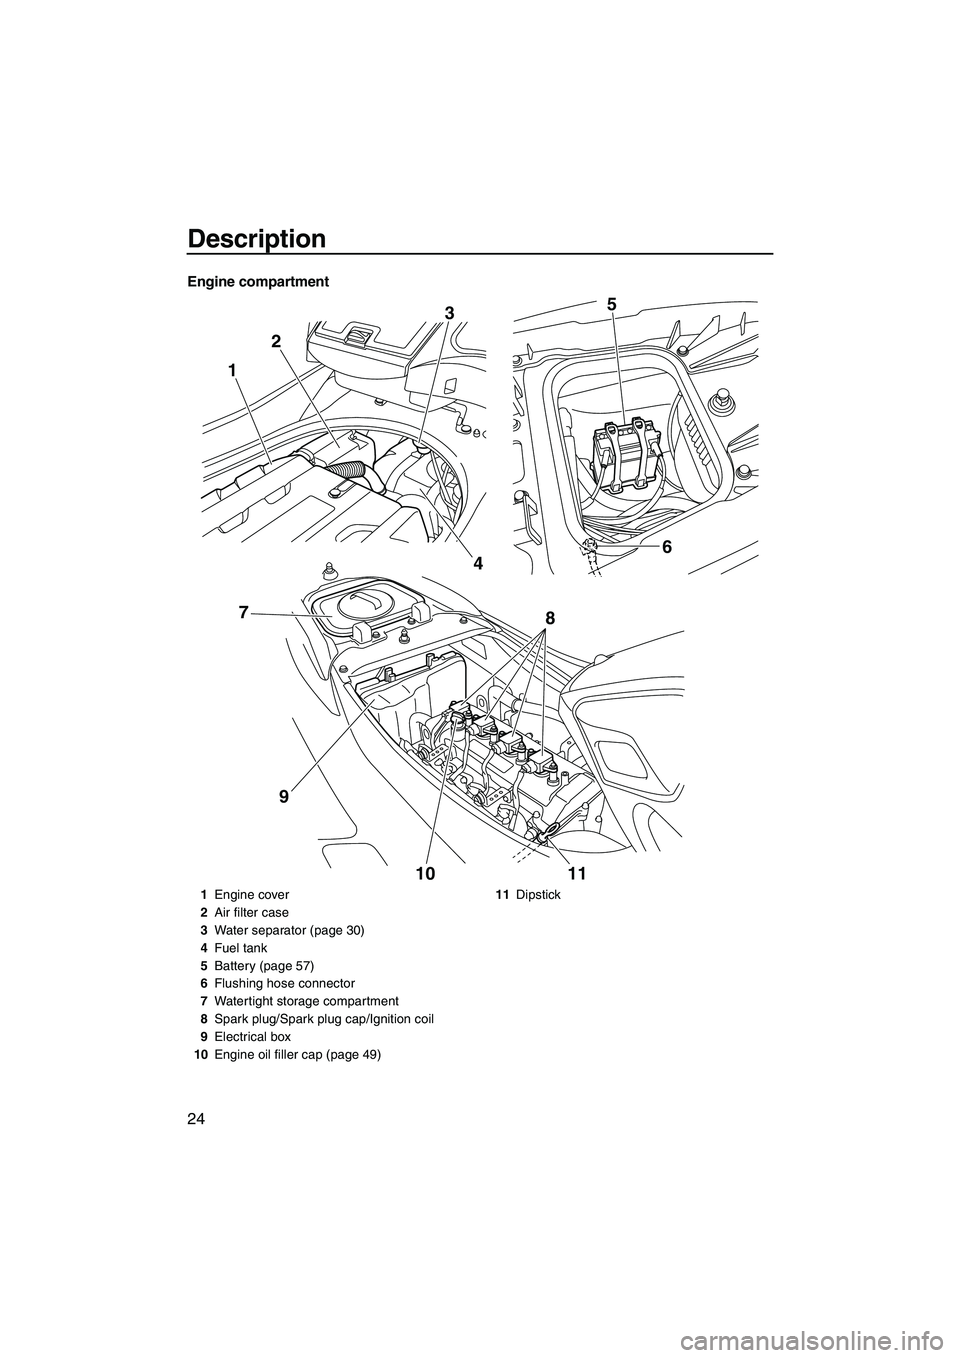 YAMAHA FZR 2013  Owners Manual Description
24
Engine compartment
12
3
4 6
5
10 11
8
97
1 Engine cover
2 Air filter case
3 Water separator (page 30)
4 Fuel tank
5 Battery (page 57)
6 Flushing hose connector
7 Watertight storage comp